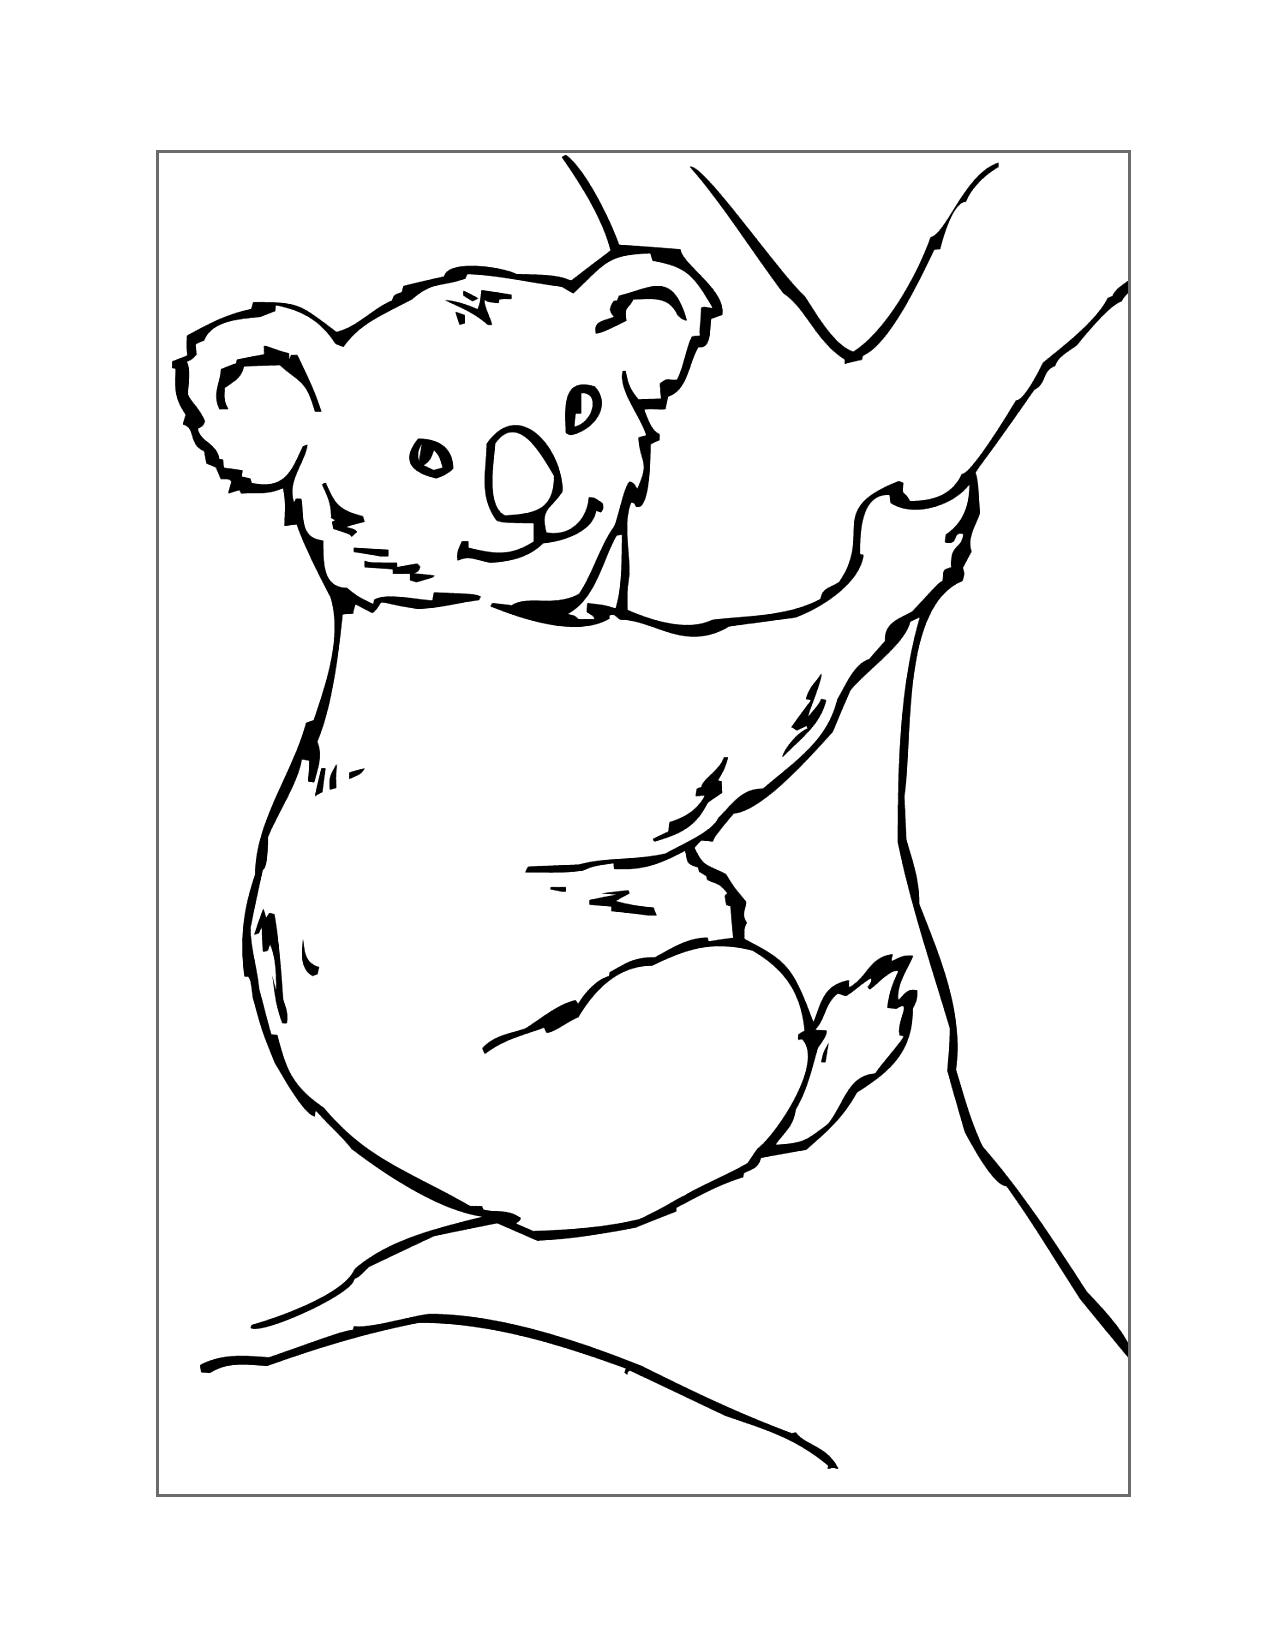 Koala In A Tree Coloring Page